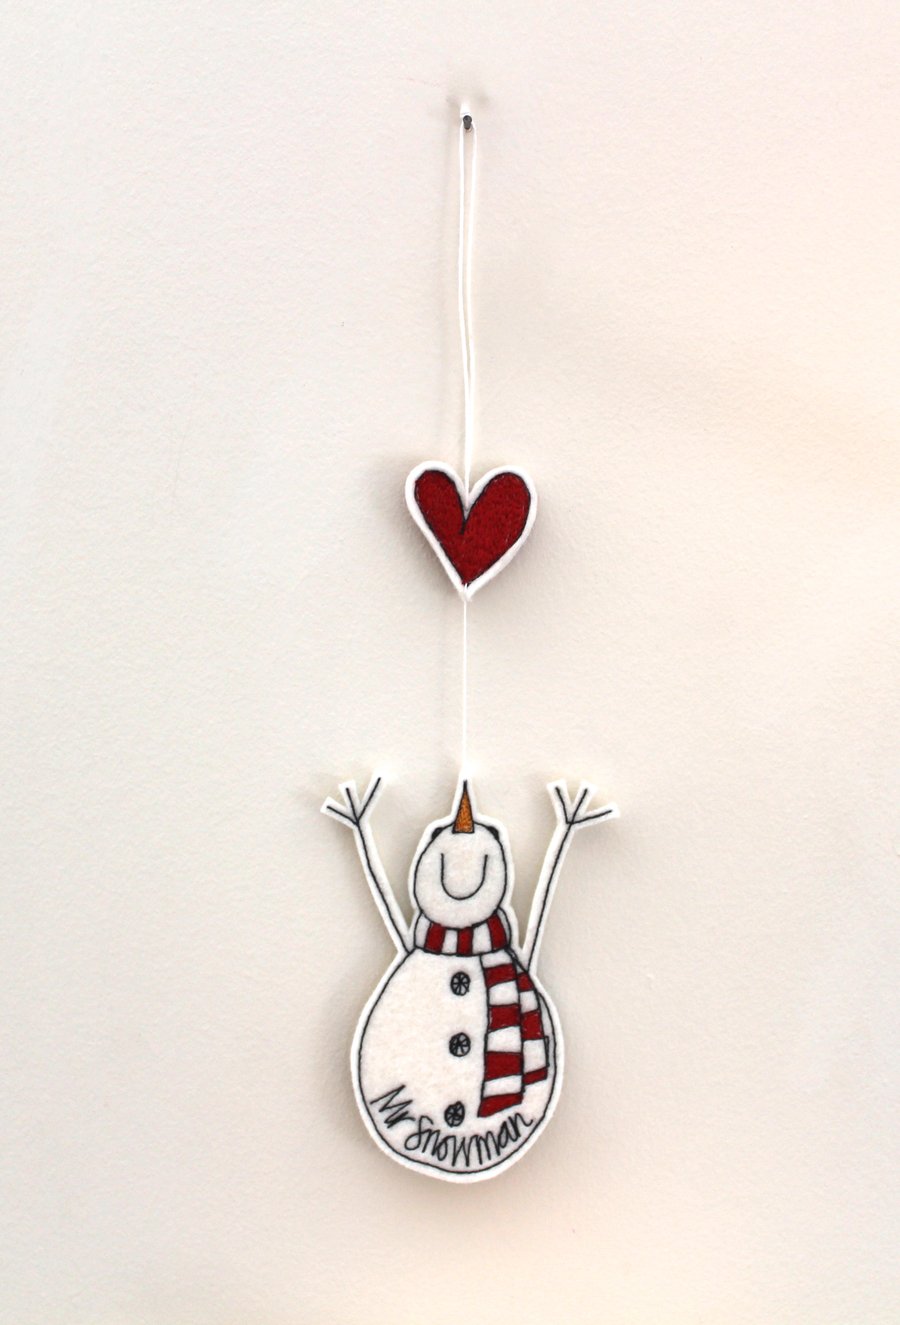 Mr Snowman Reaching for a Heart - Hanging Decoration